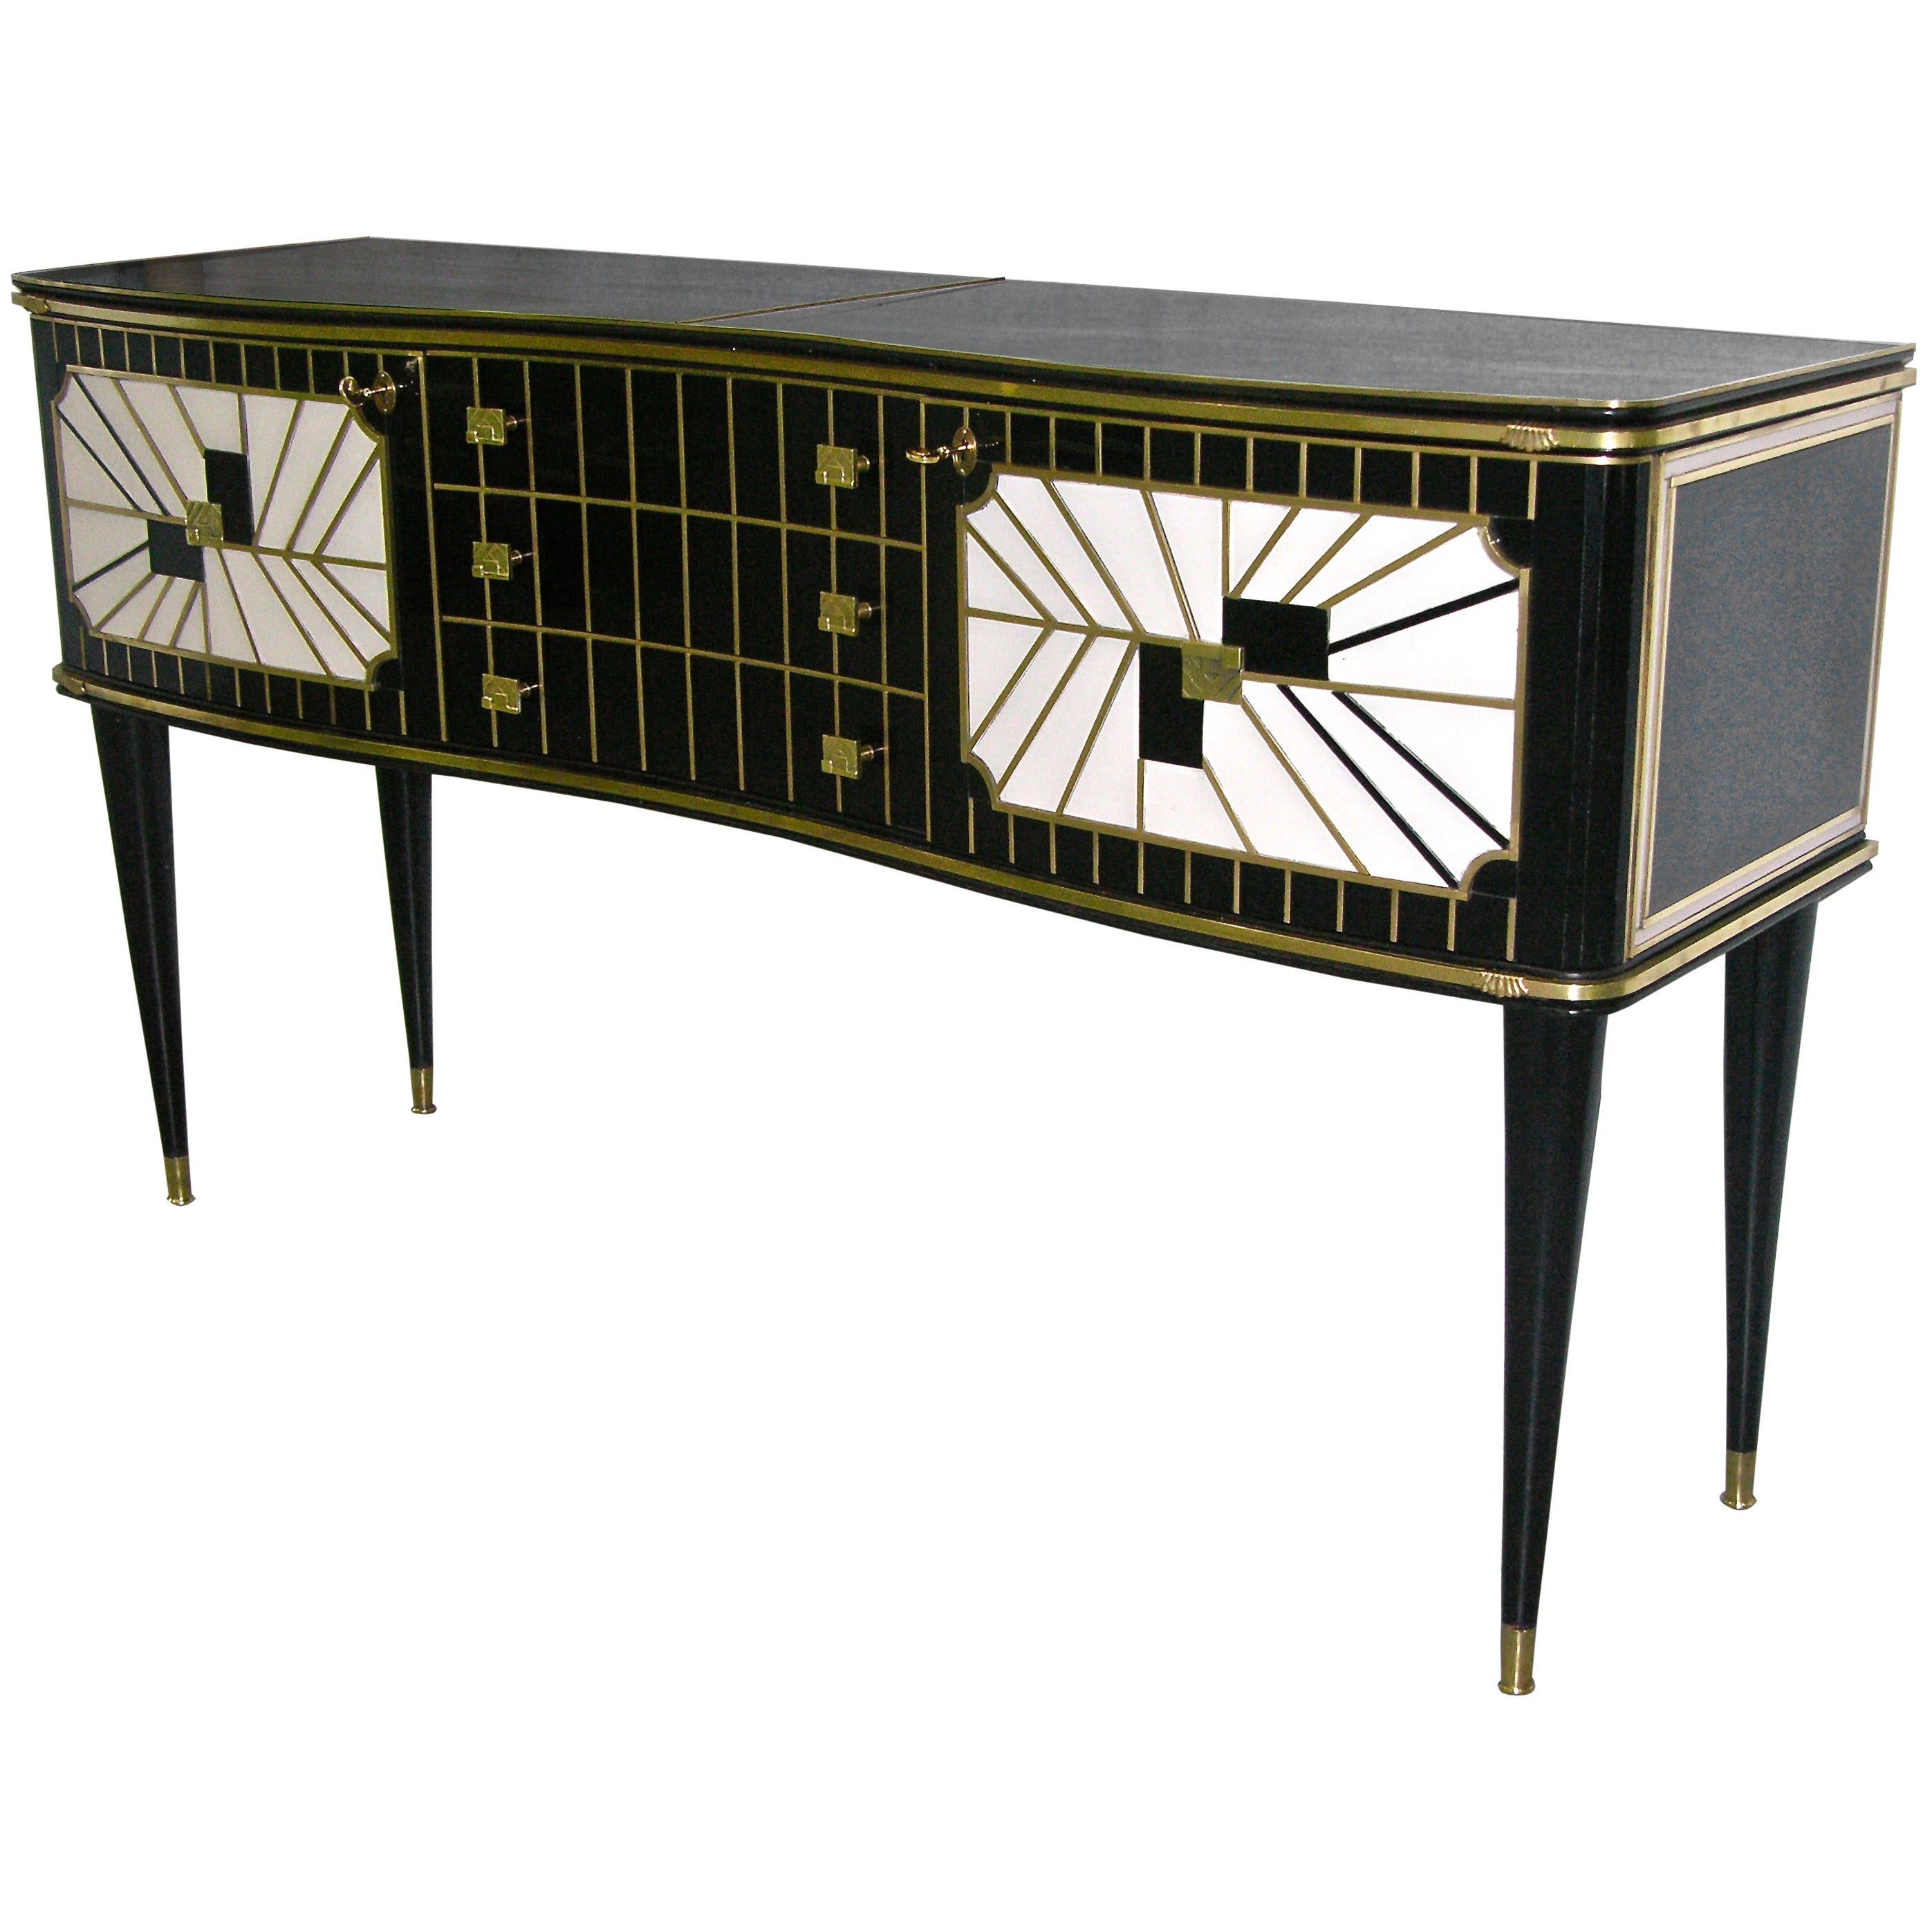 1970s Italian Art Deco Design Black and White Sideboard Highlighted in Bronze